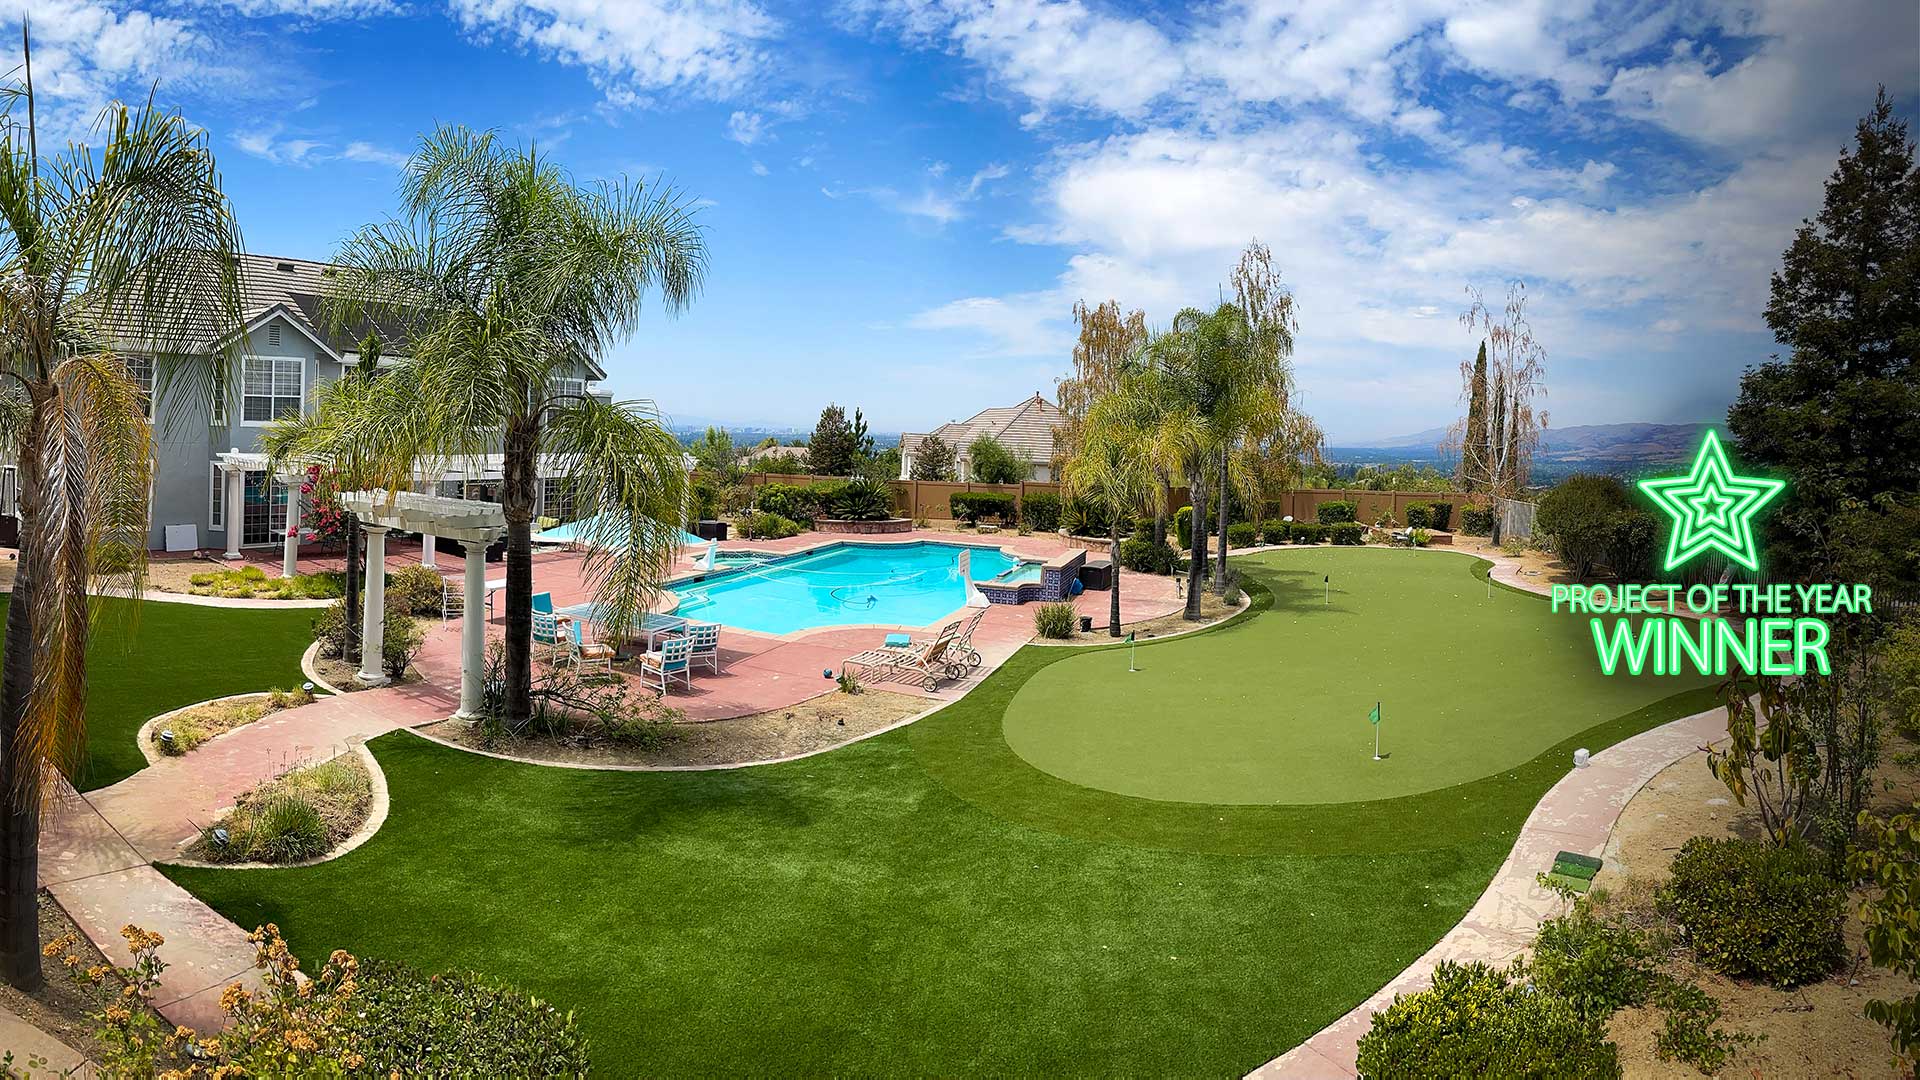 California Home Transformed with State-of-the-Art Dream Lawn